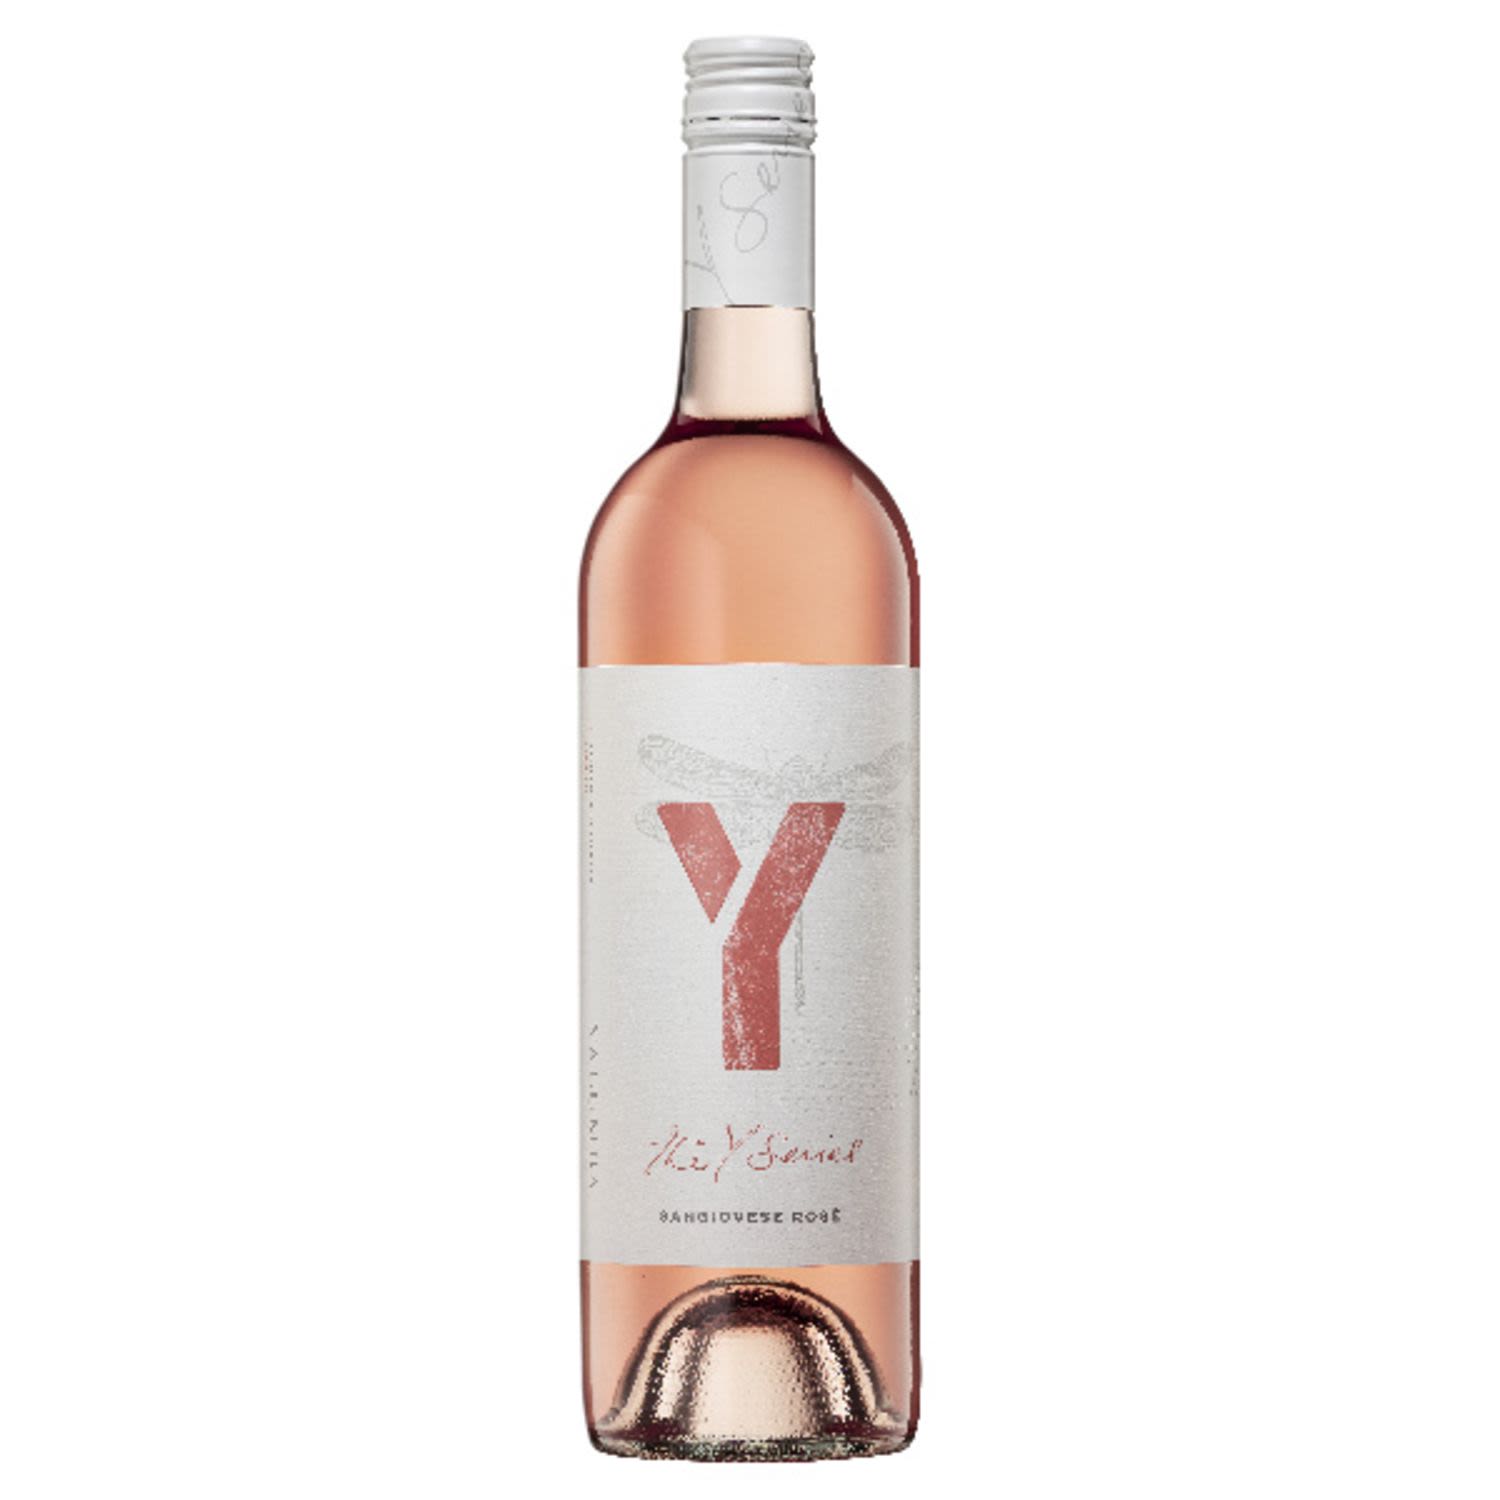 <p>The Y Series Sangiovese Rosé is made from the classic Italian variety Sangiovese, this light, bright and dry Rosé leaps from the glass with pretty floral and berry aromatics.</p>
<p><br></p>
<p>Alcohol Volume: 11.50%</p>
<p><br></p>
<p>Pack Format: Bottle</p>
<p><br></p>
<p>Standard Drinks: 6.8</p>
<p><br></p>
<p>Pack Type: Bottle</p>
<p><br></p>
<p>Country of Origin: Australia</p>
<p><br></p>
<p>Region: South Australia</p>
<p><br></p>
<p>Vintage: Vintages Vary</p>